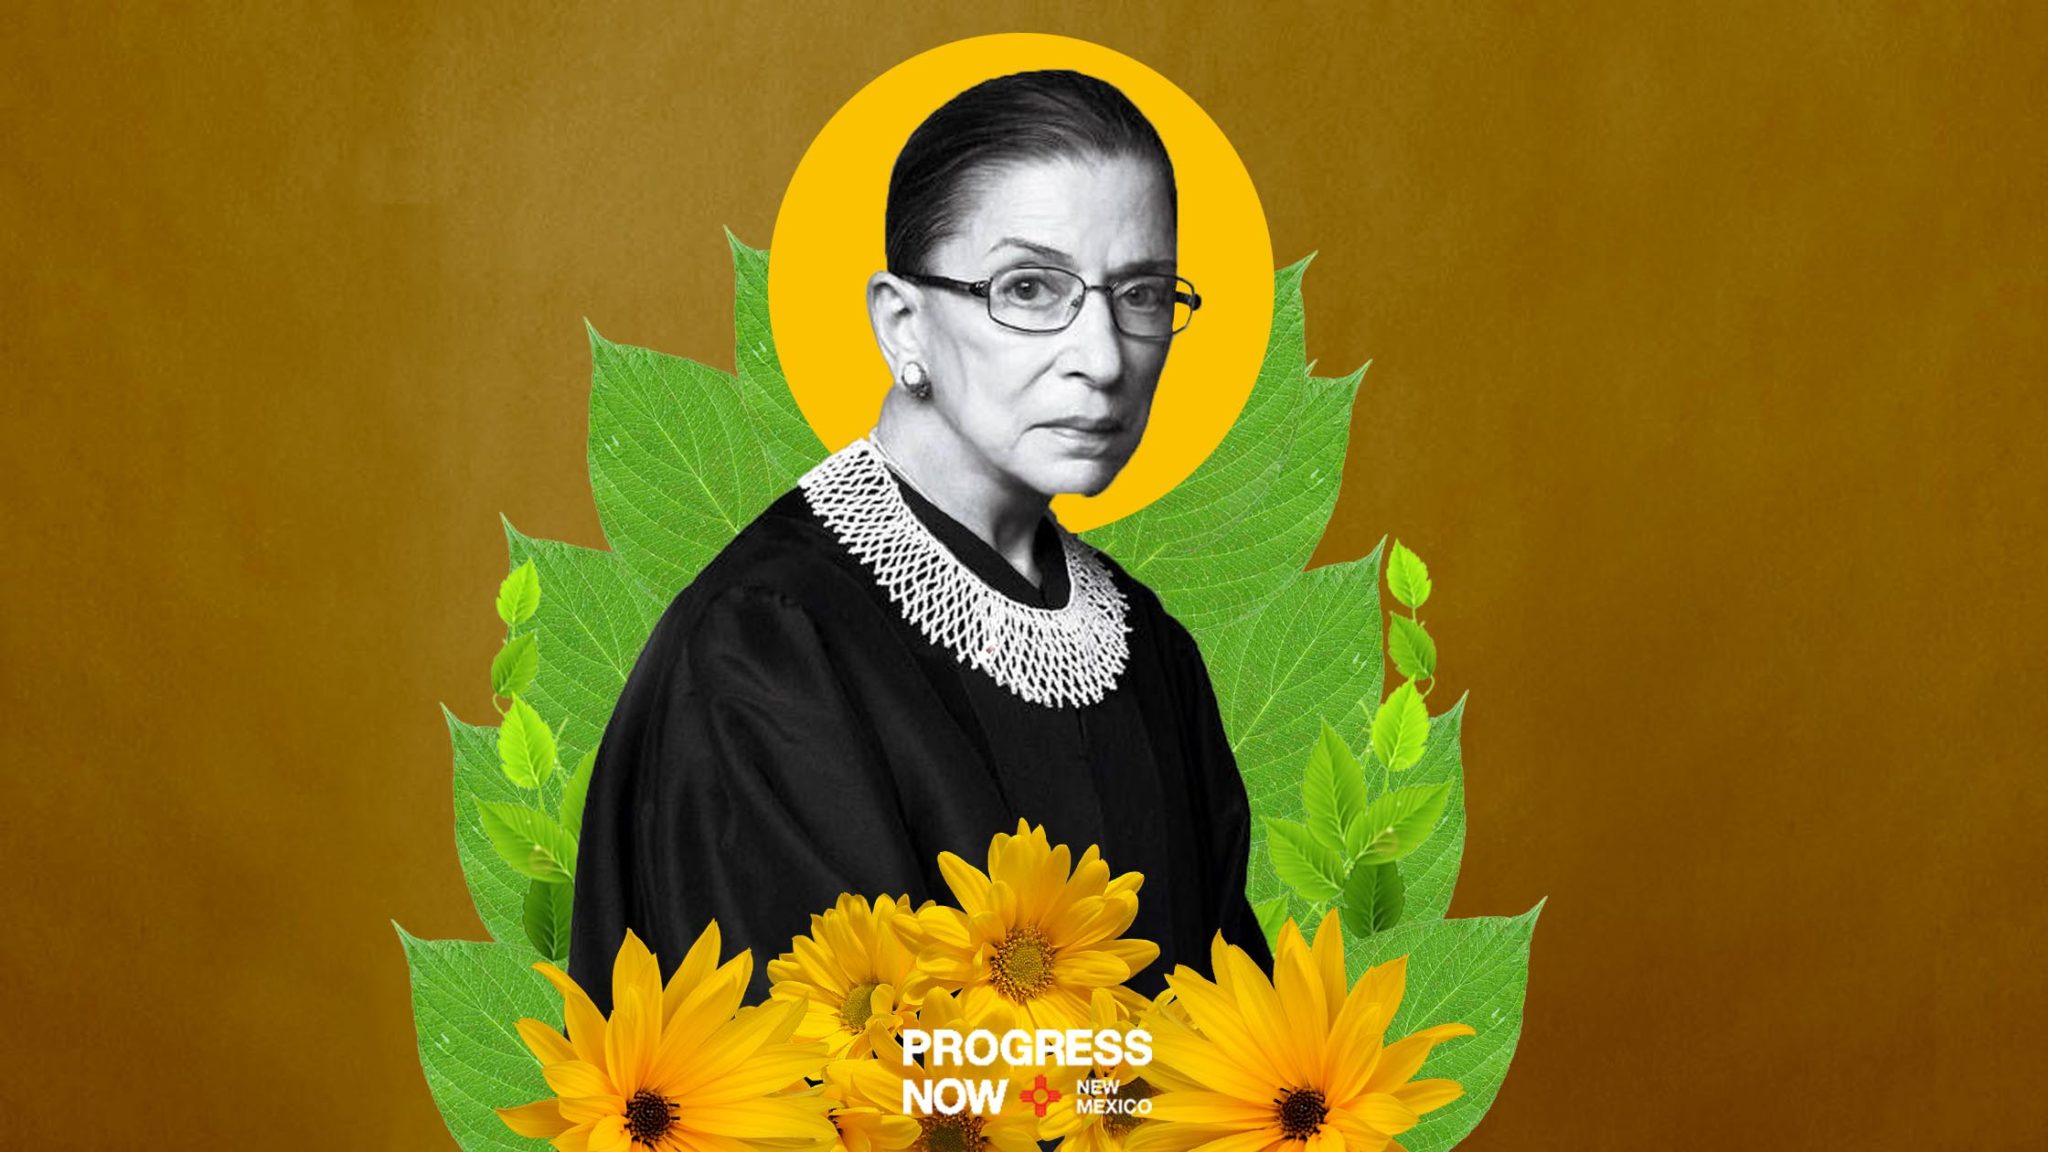 be-remembered-in-revolution-ruth-bader-ginsburg-progress-now